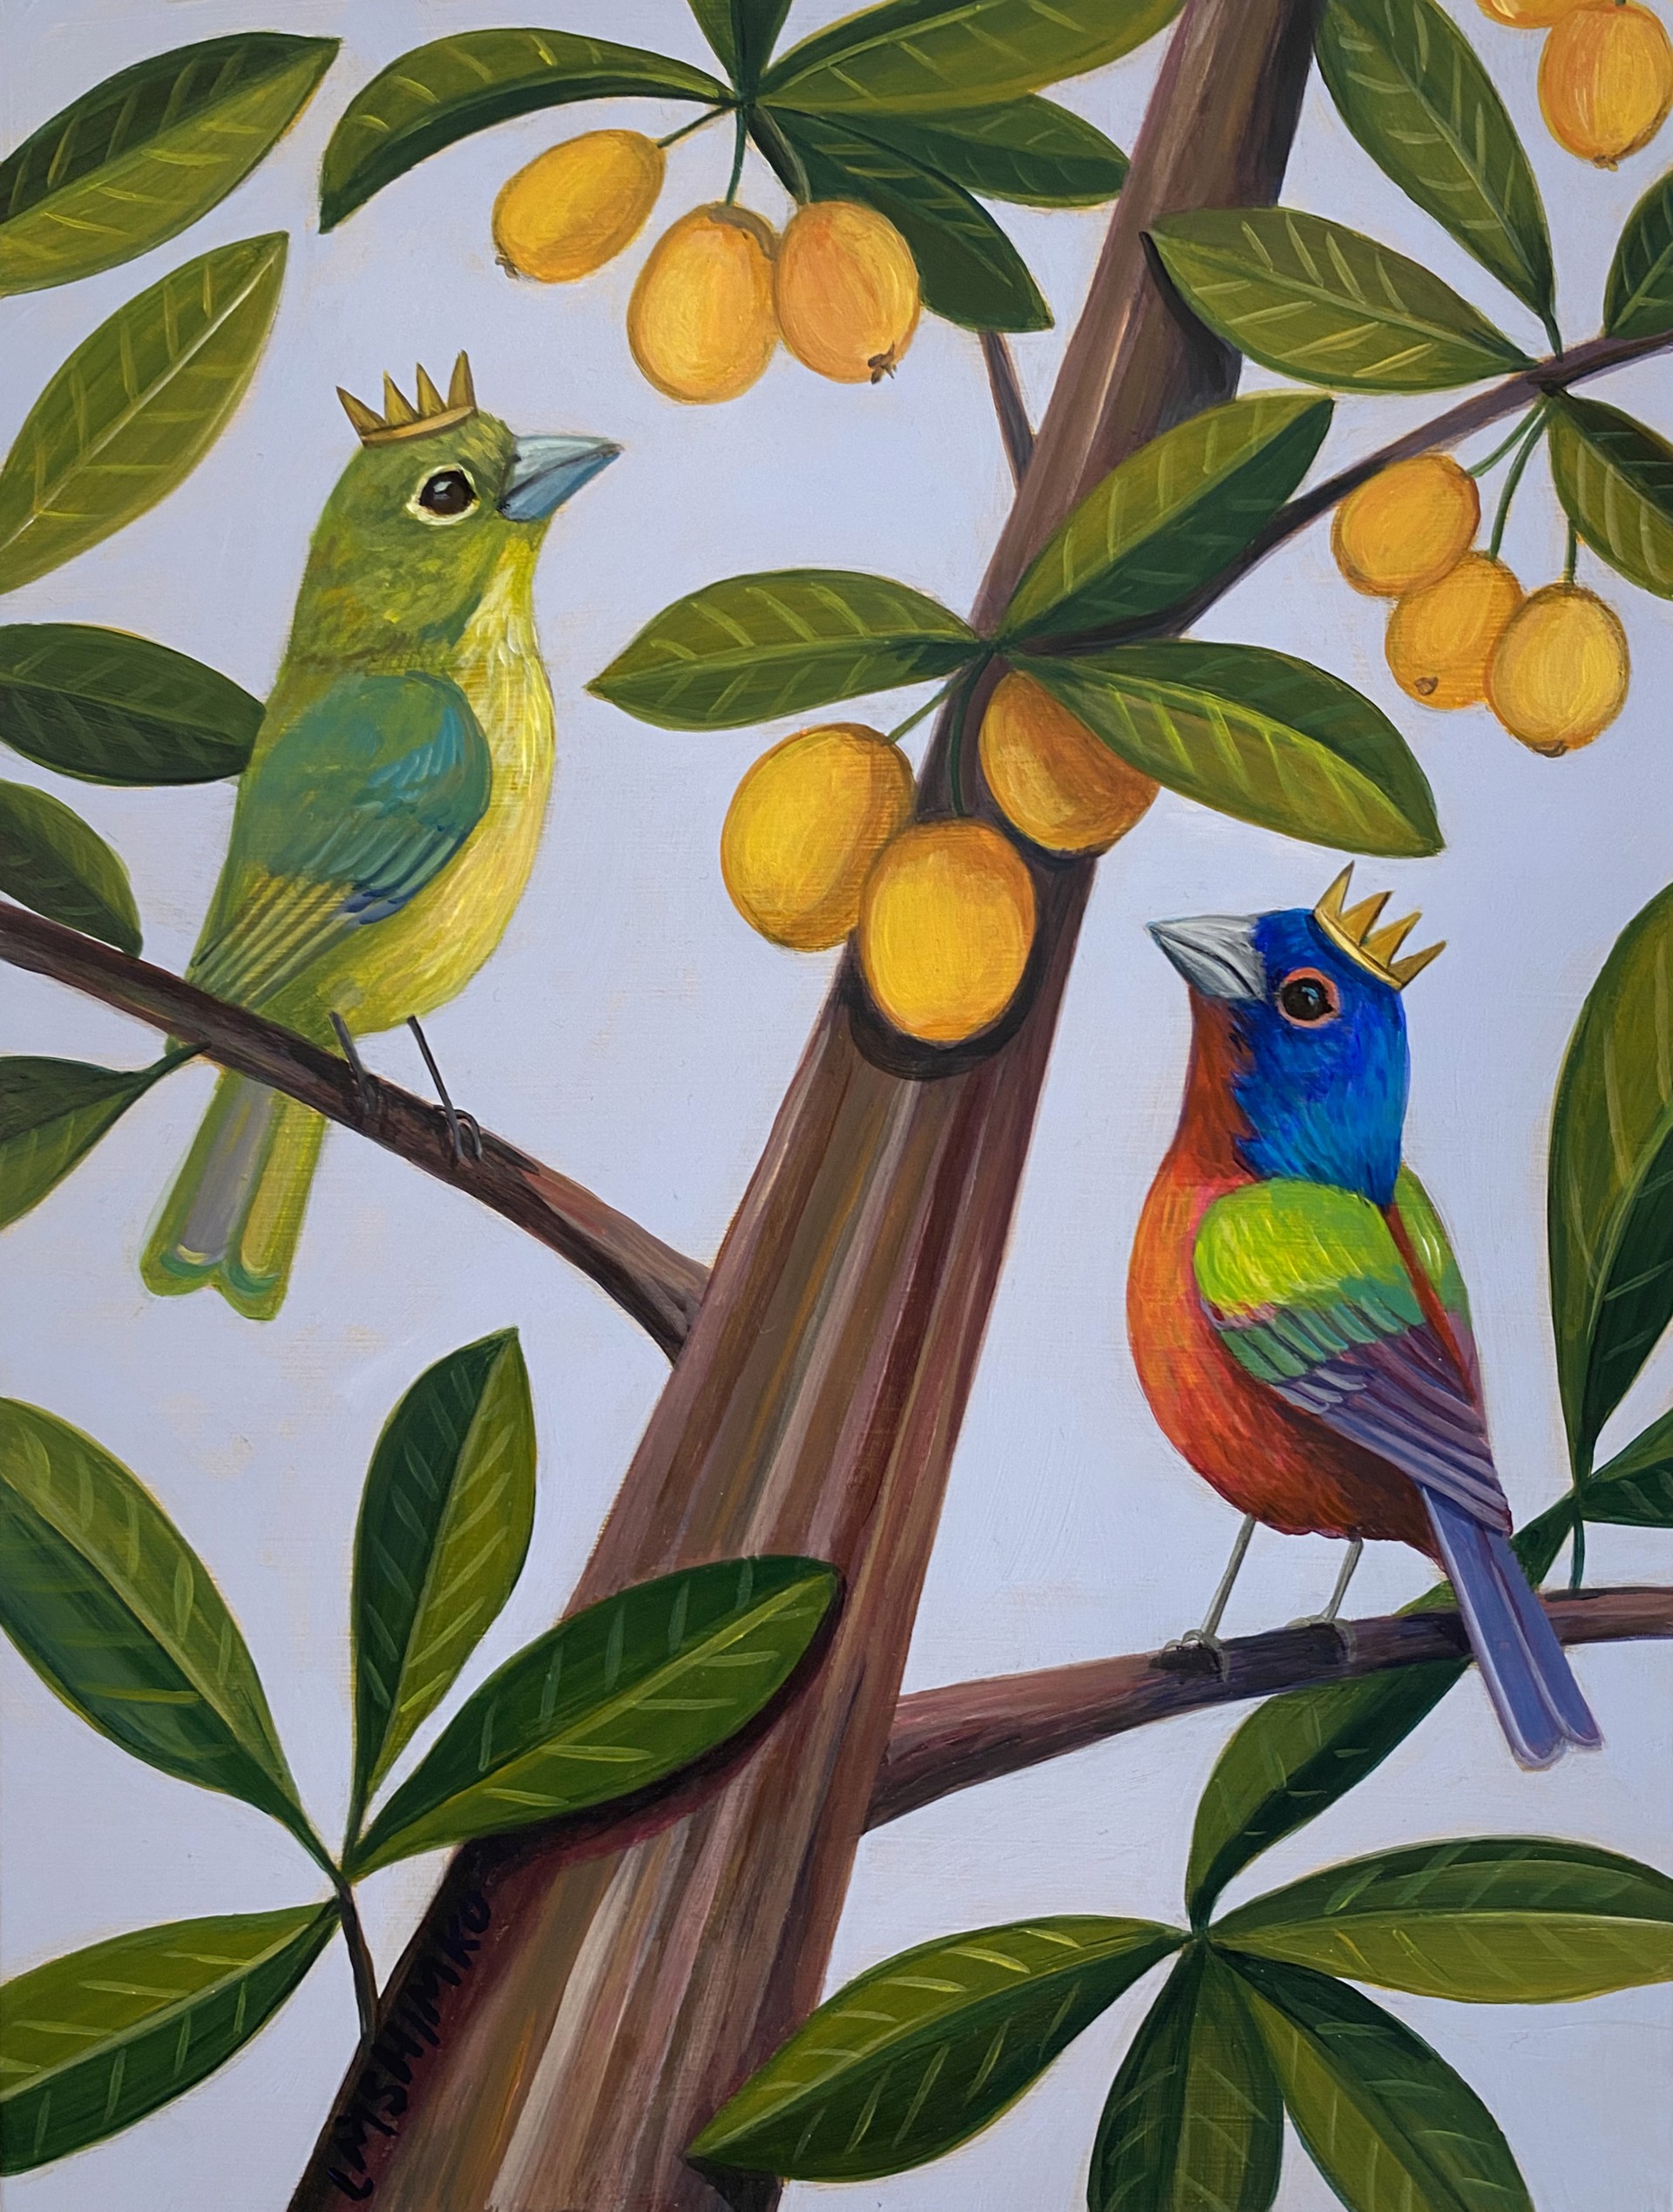 Painted Bunting Queen & King Loquat by Lisa Shimko